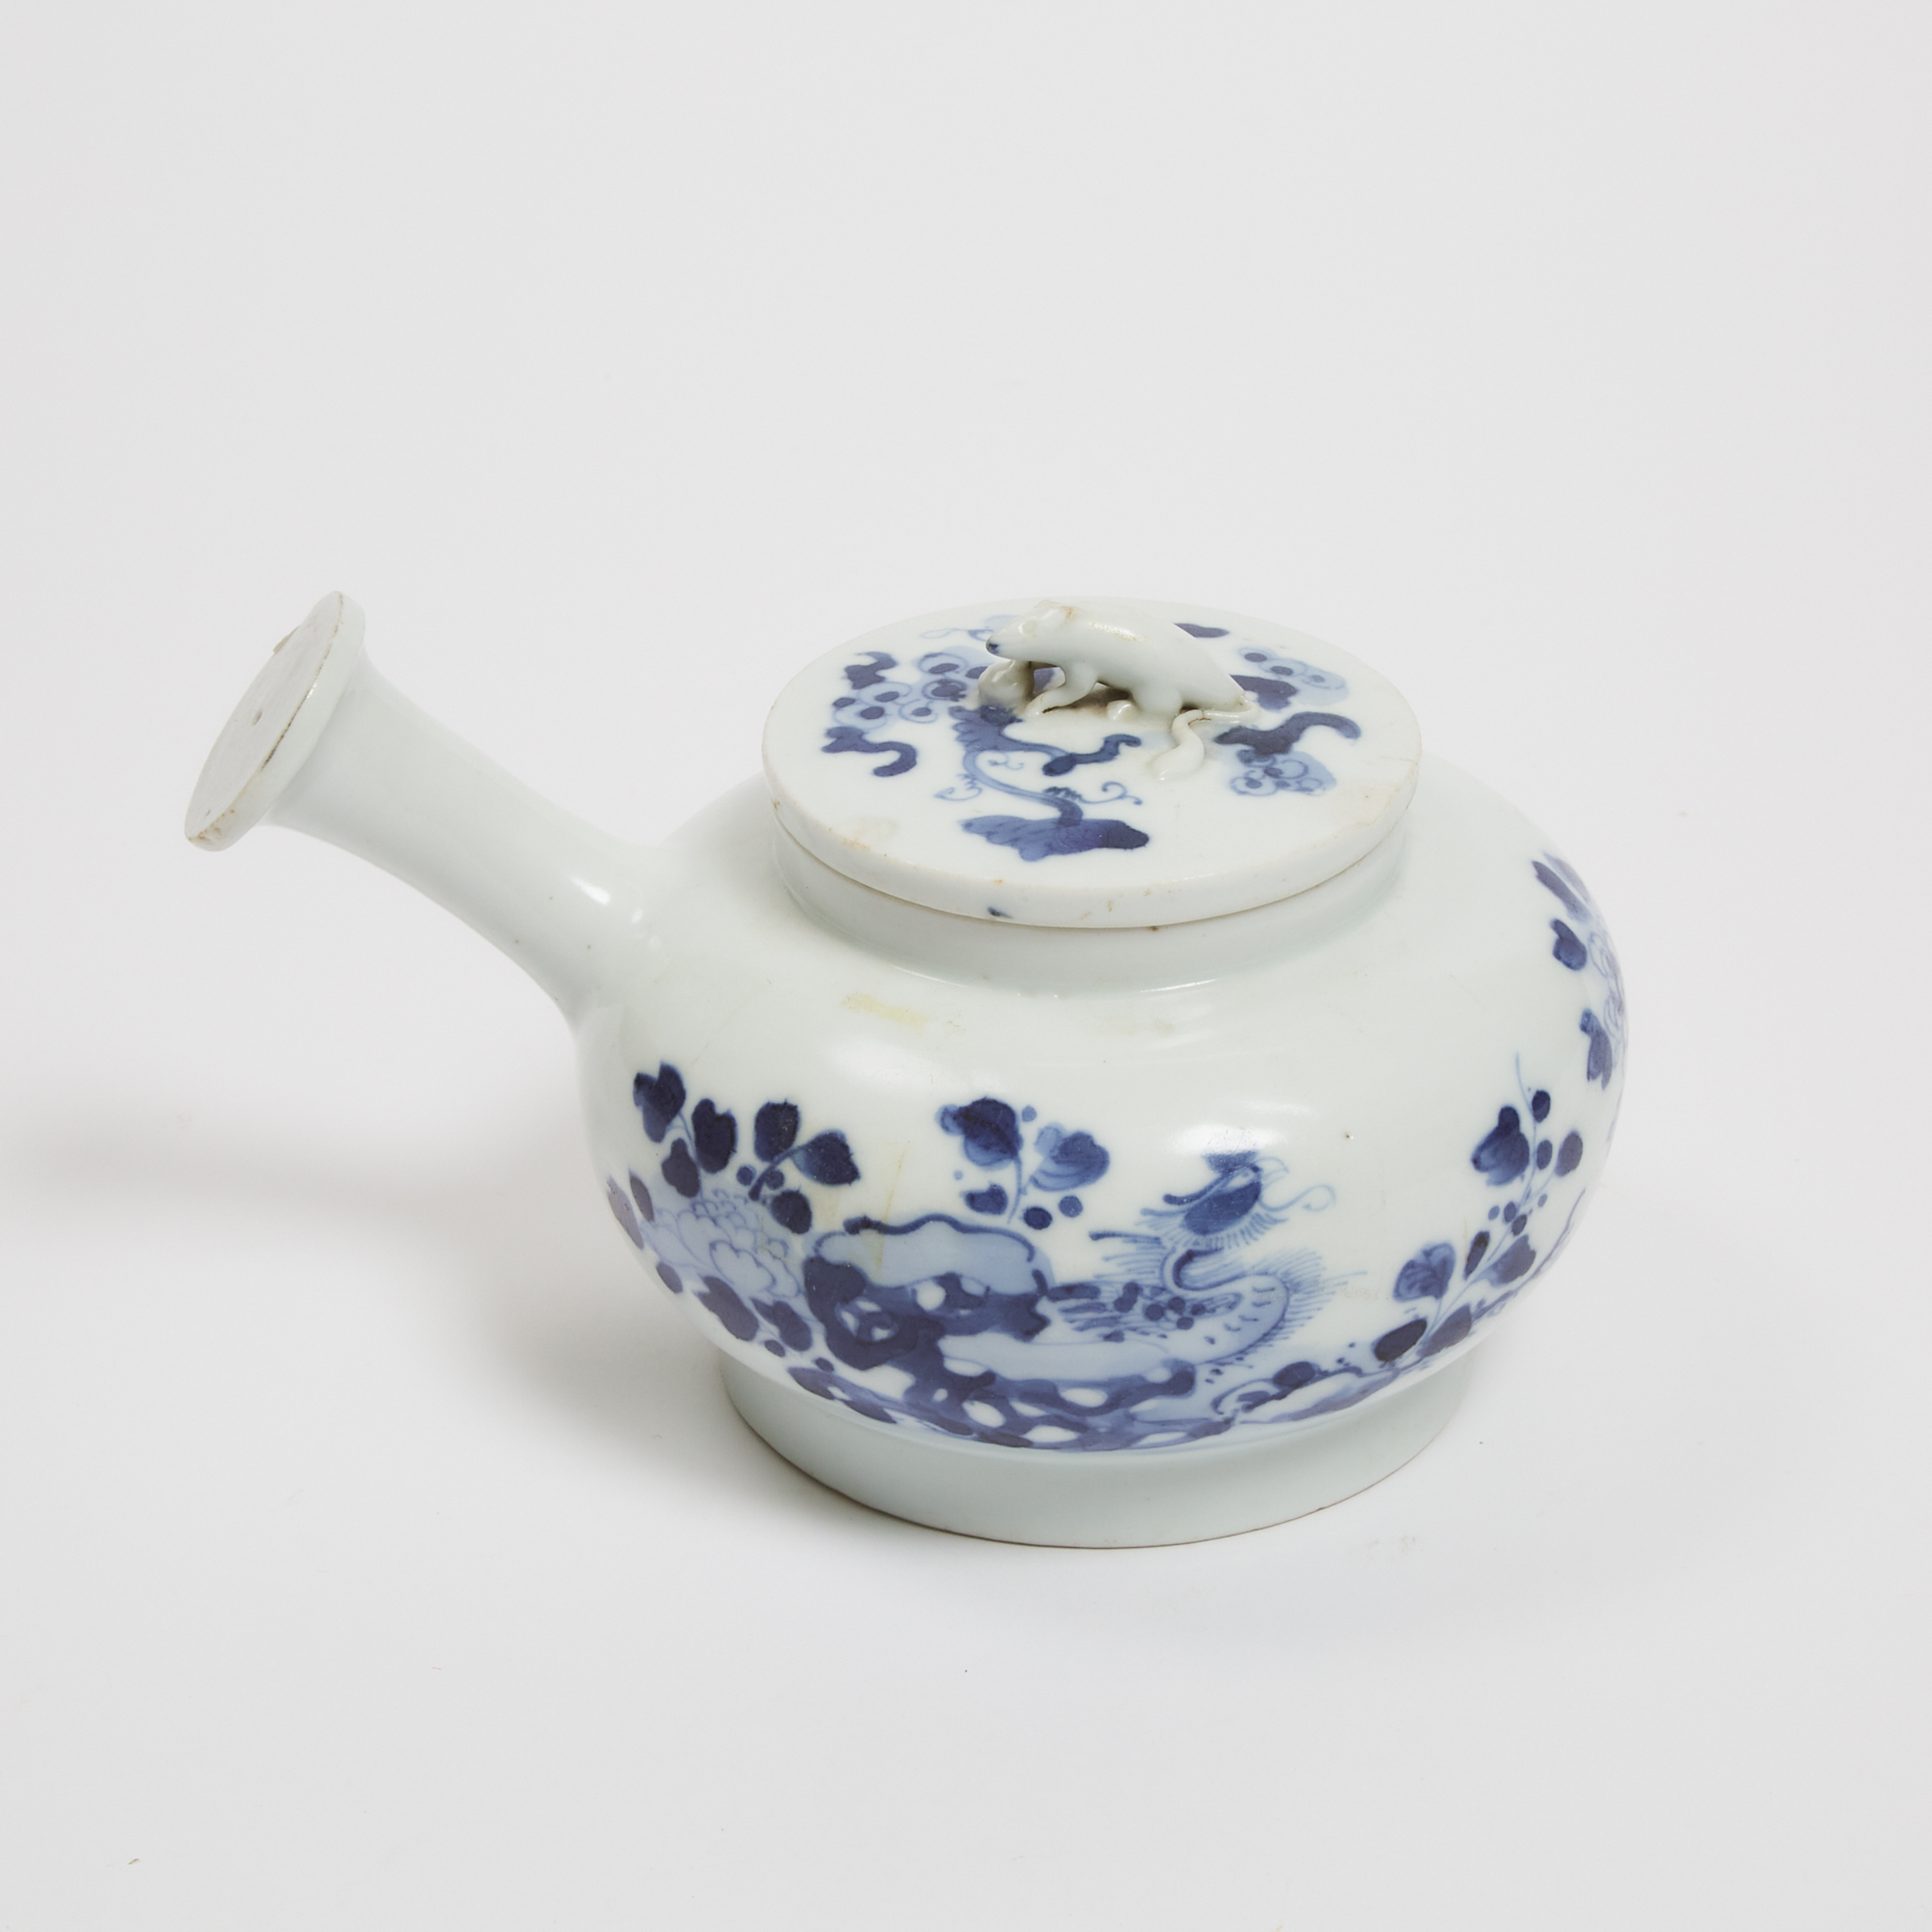 A Blue and White 'Phoenix' Teapot, 18th Century